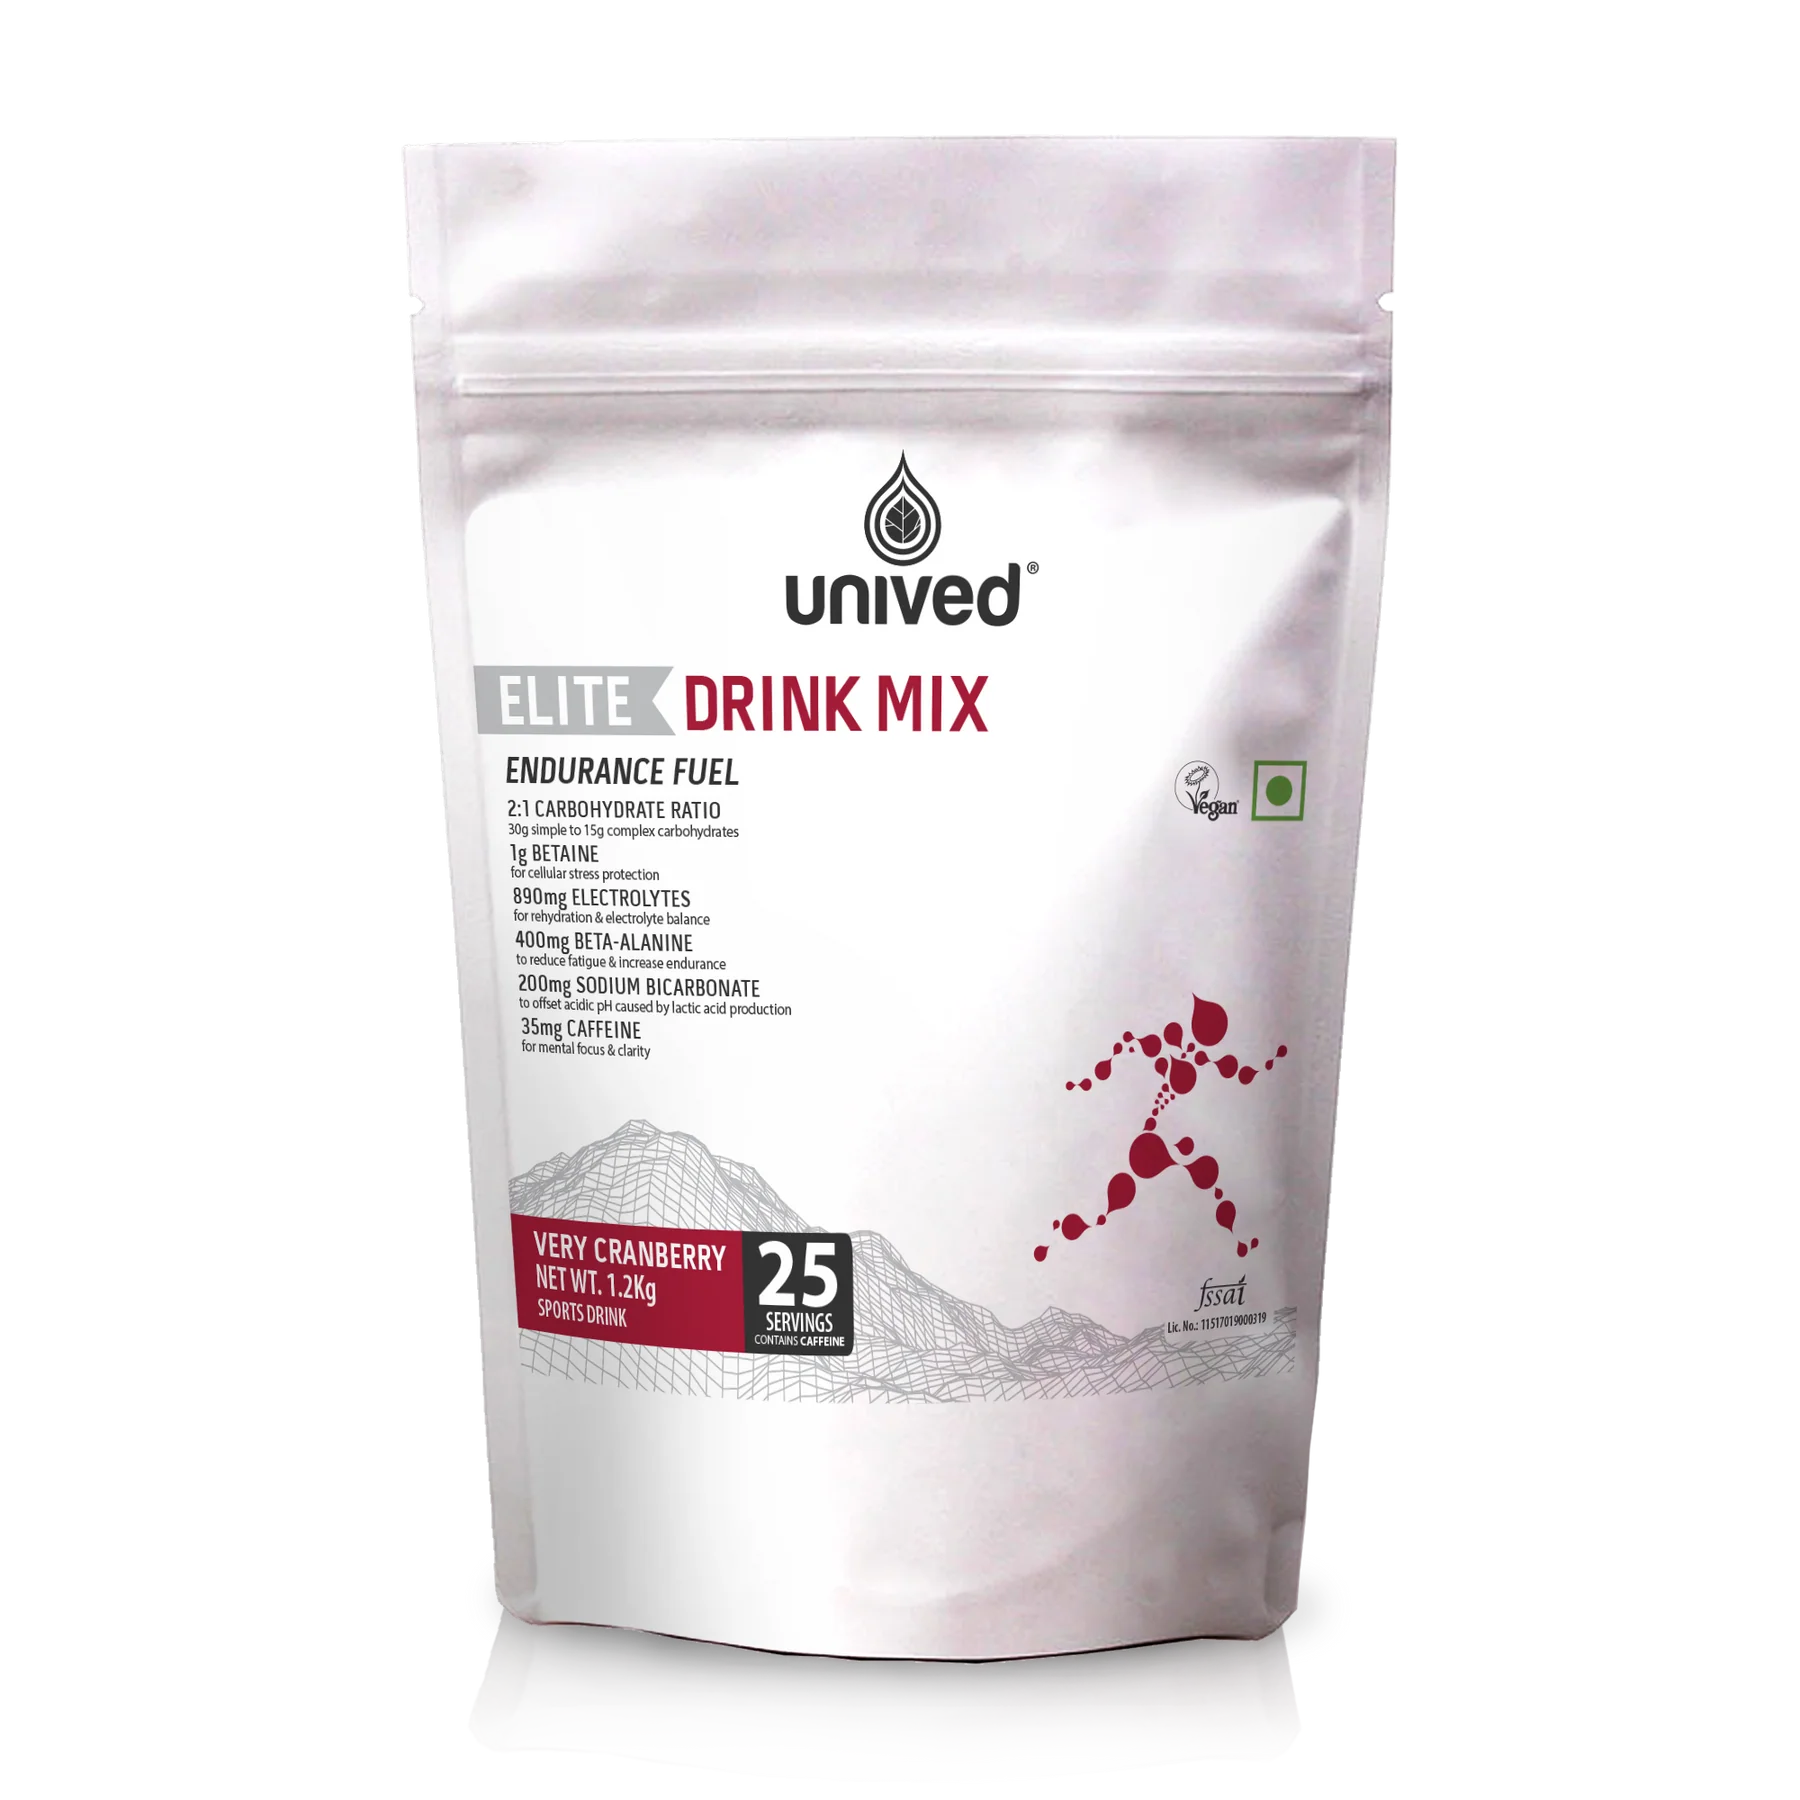 UNIVED ELITE DRINK MIX (VERY CRANBERRY) 25 SERVINGS